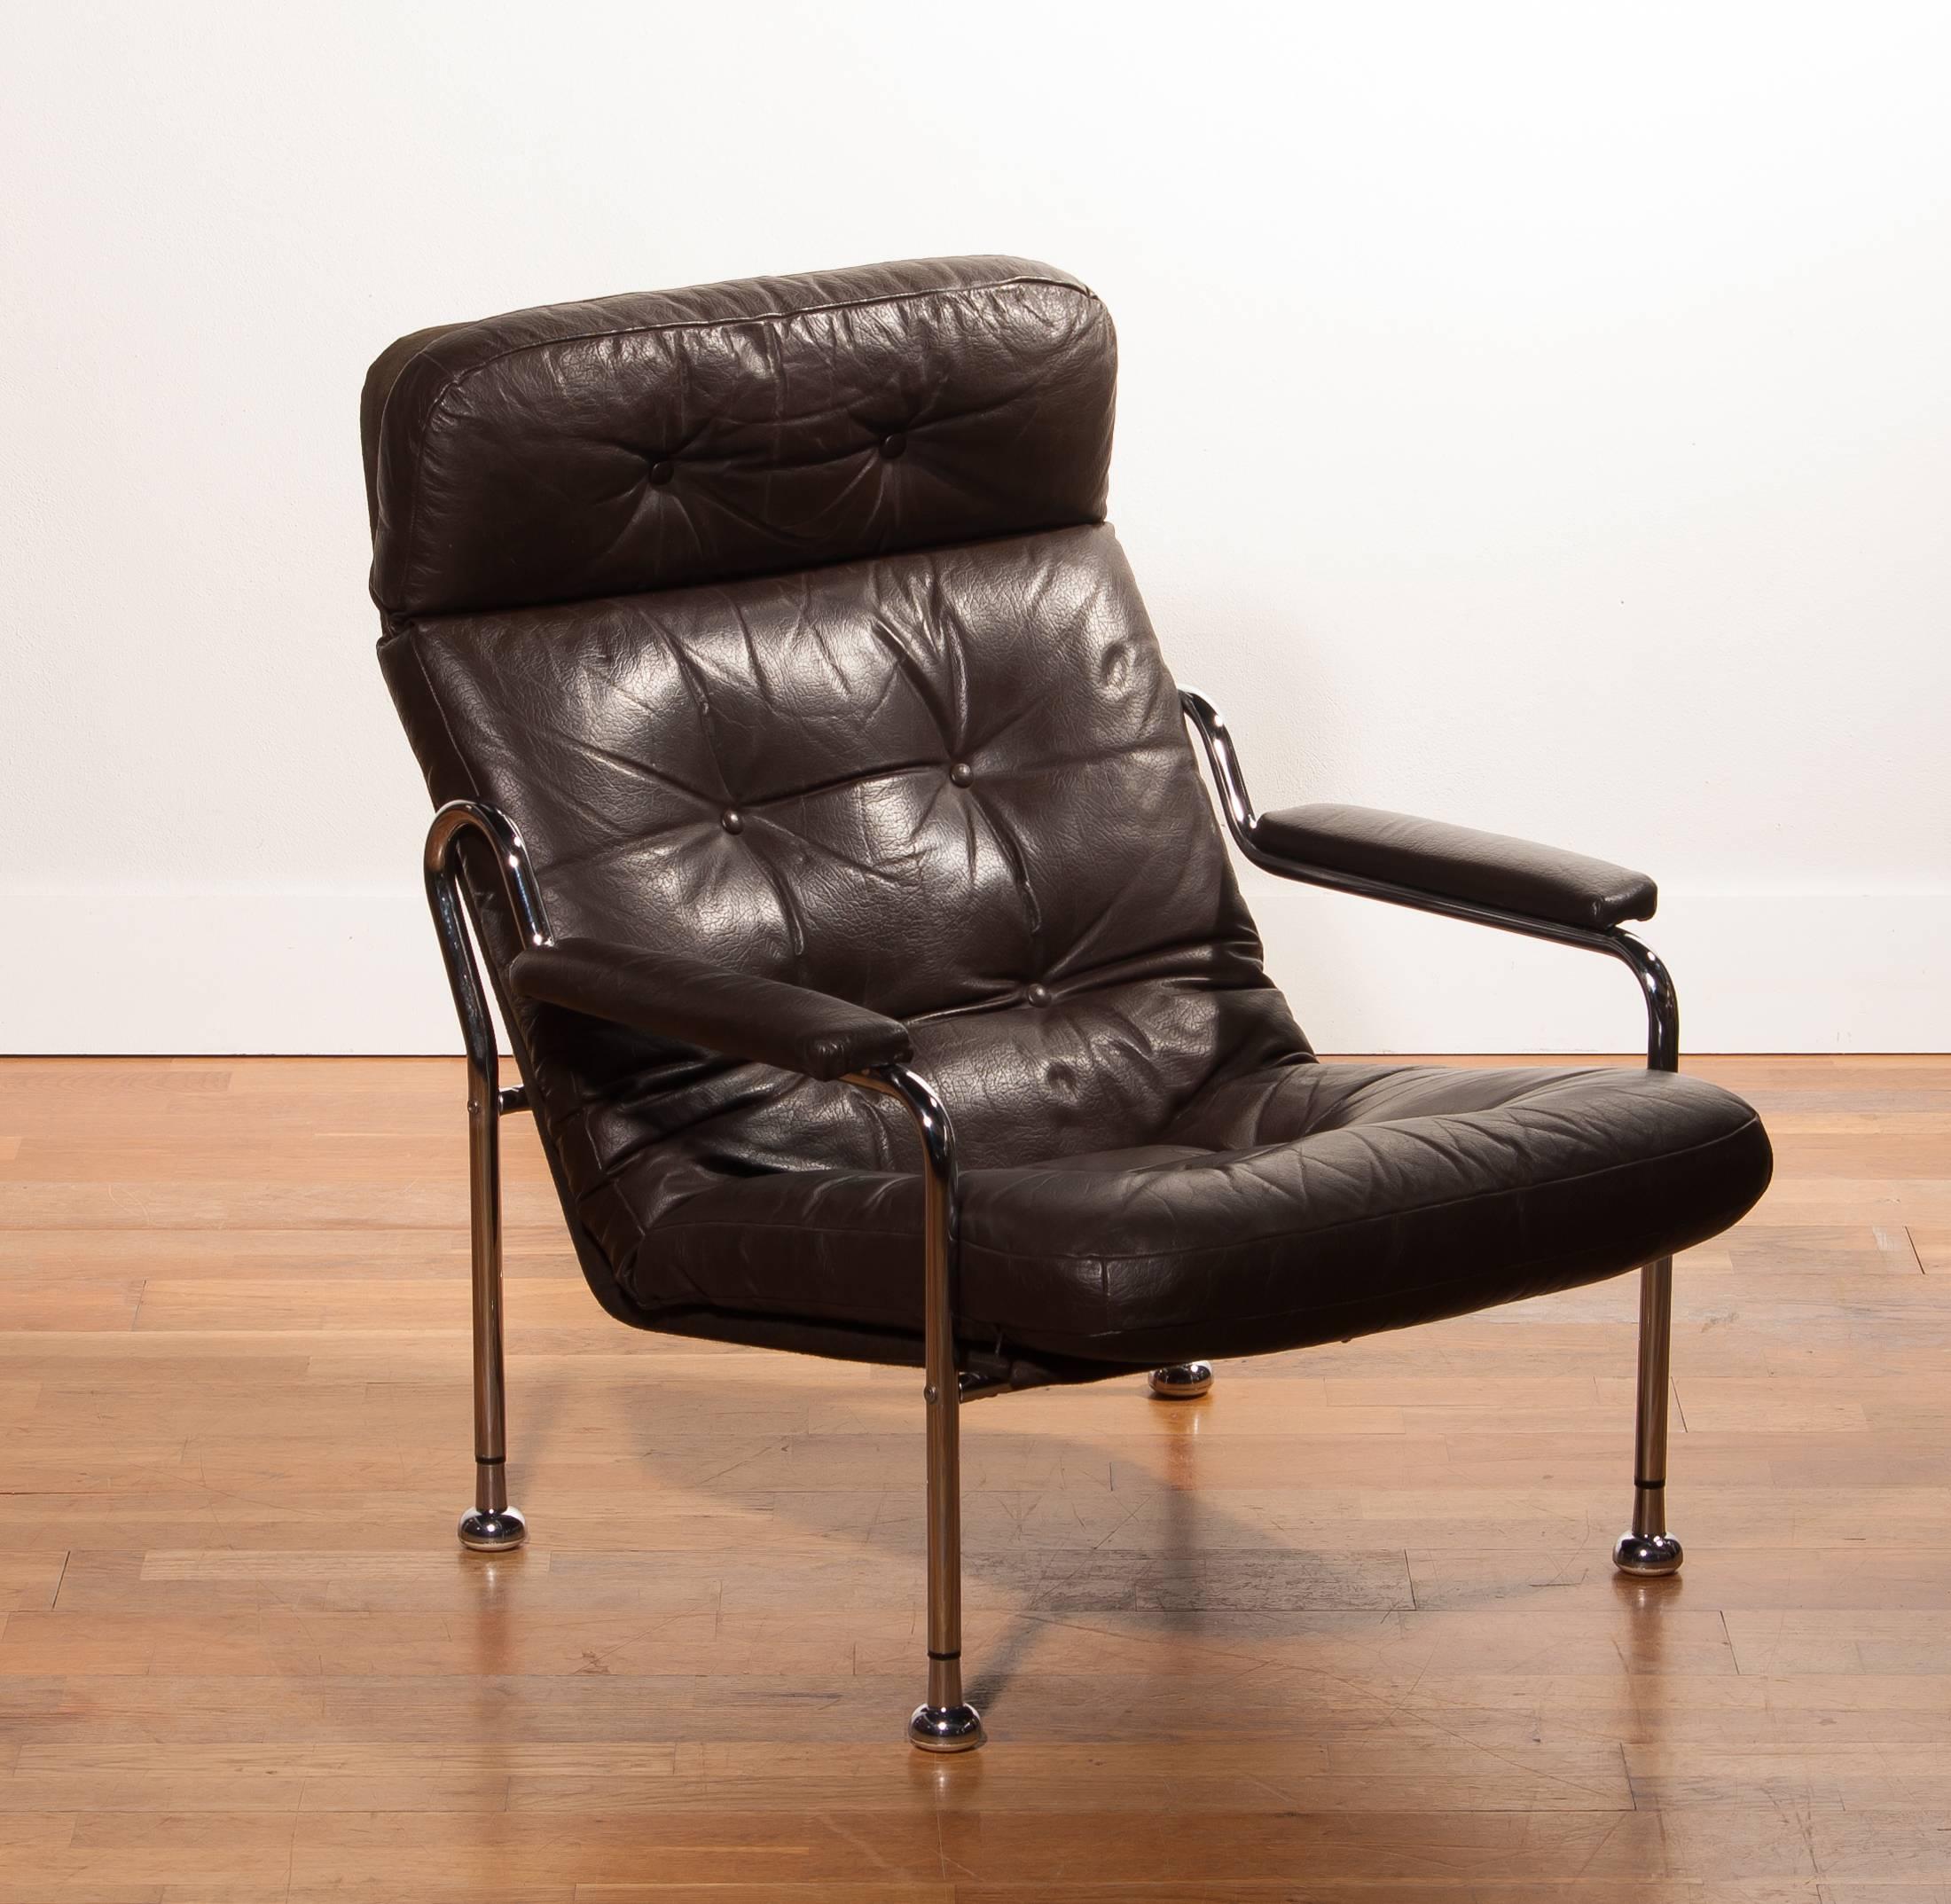 Beautiful lounge chairs made in Sweden.
These very nice design chairs have a dark brown leather seating and armrests on a tubular chrome steel frame.
They are in a wonderful condition.
Period 1970s
Dimensions : H 86 cm , W 63 cm , D 70 cm , Sh